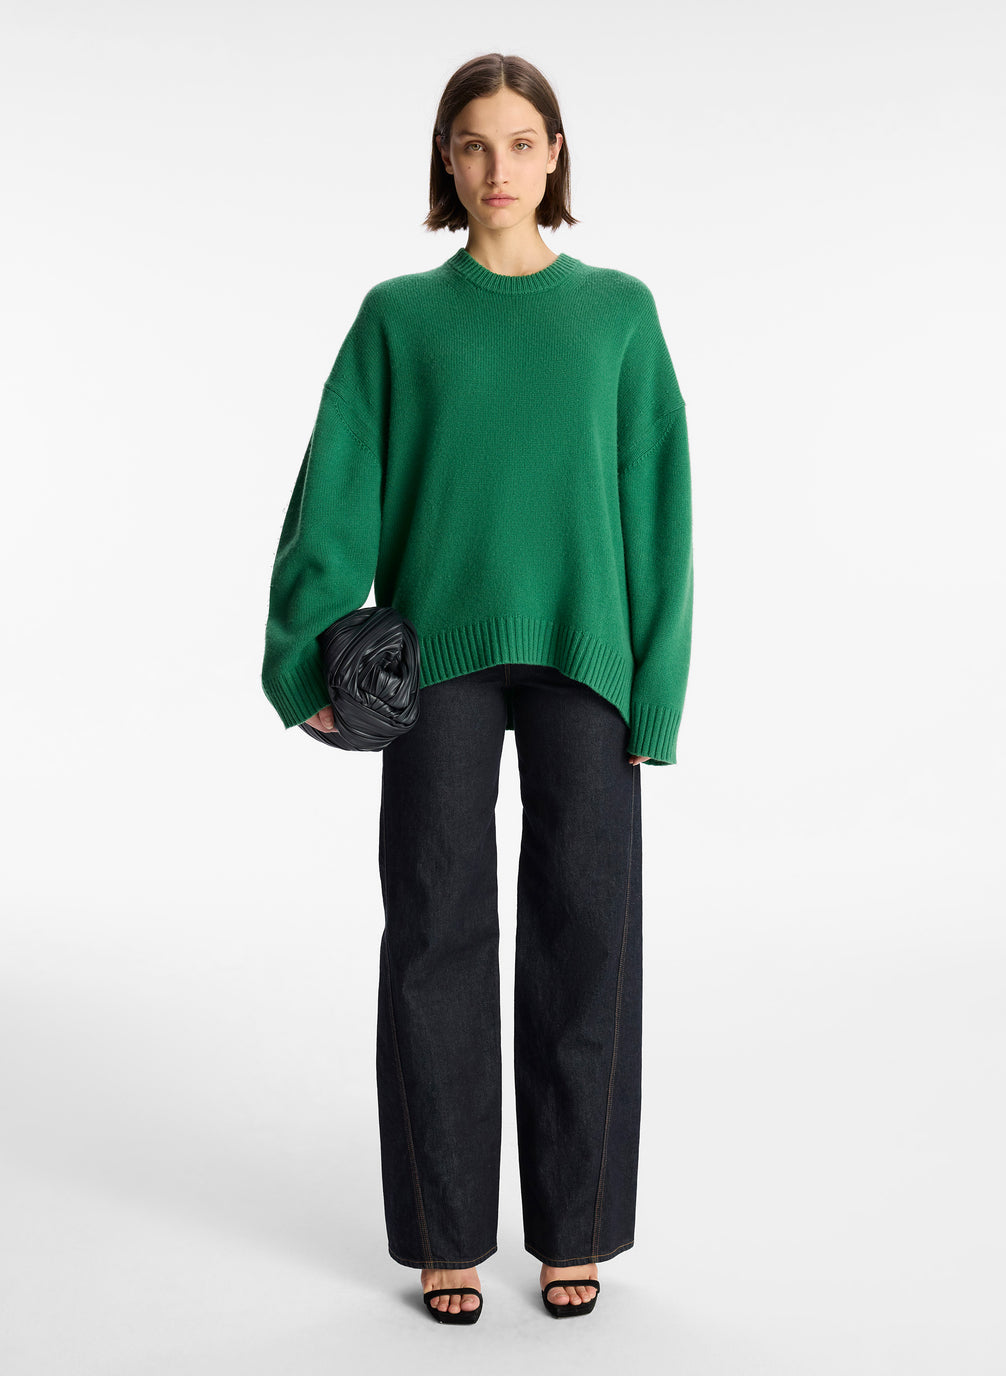 front view of woman wearing green cashmere long sleeve sweater